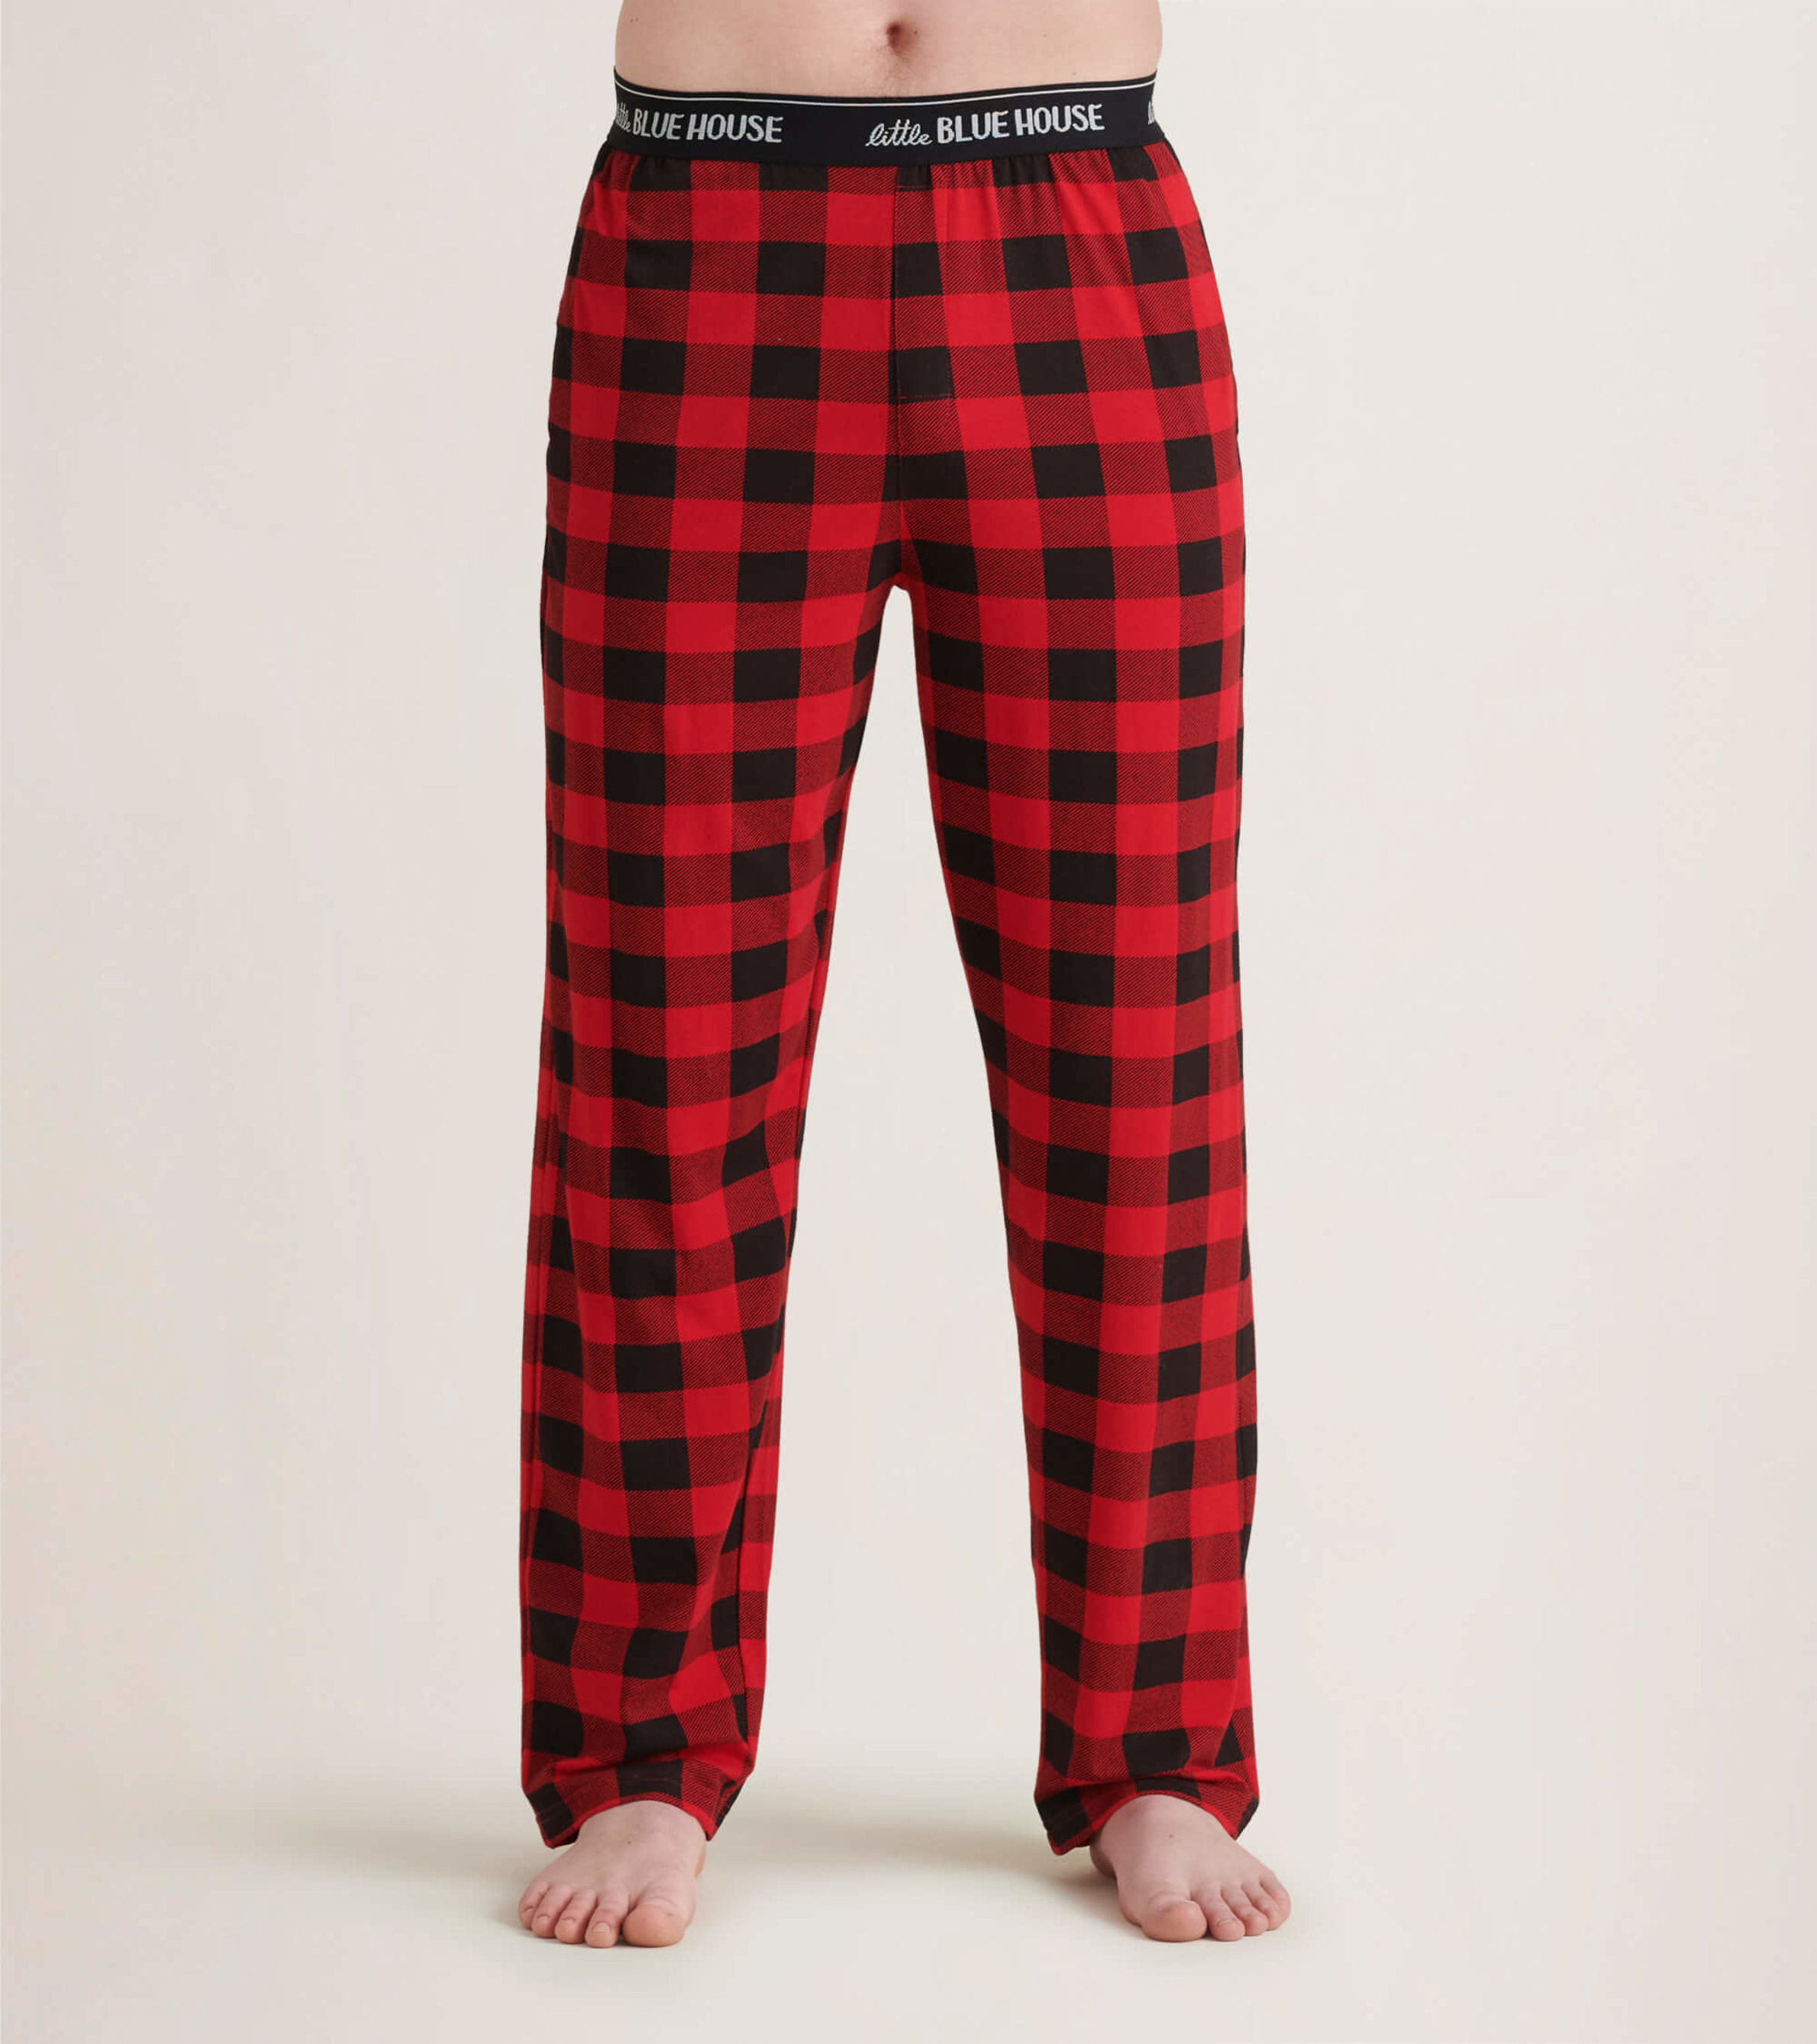 Come Together Plaid Pants - Black/Red - Free Shipping On Orders Over $75